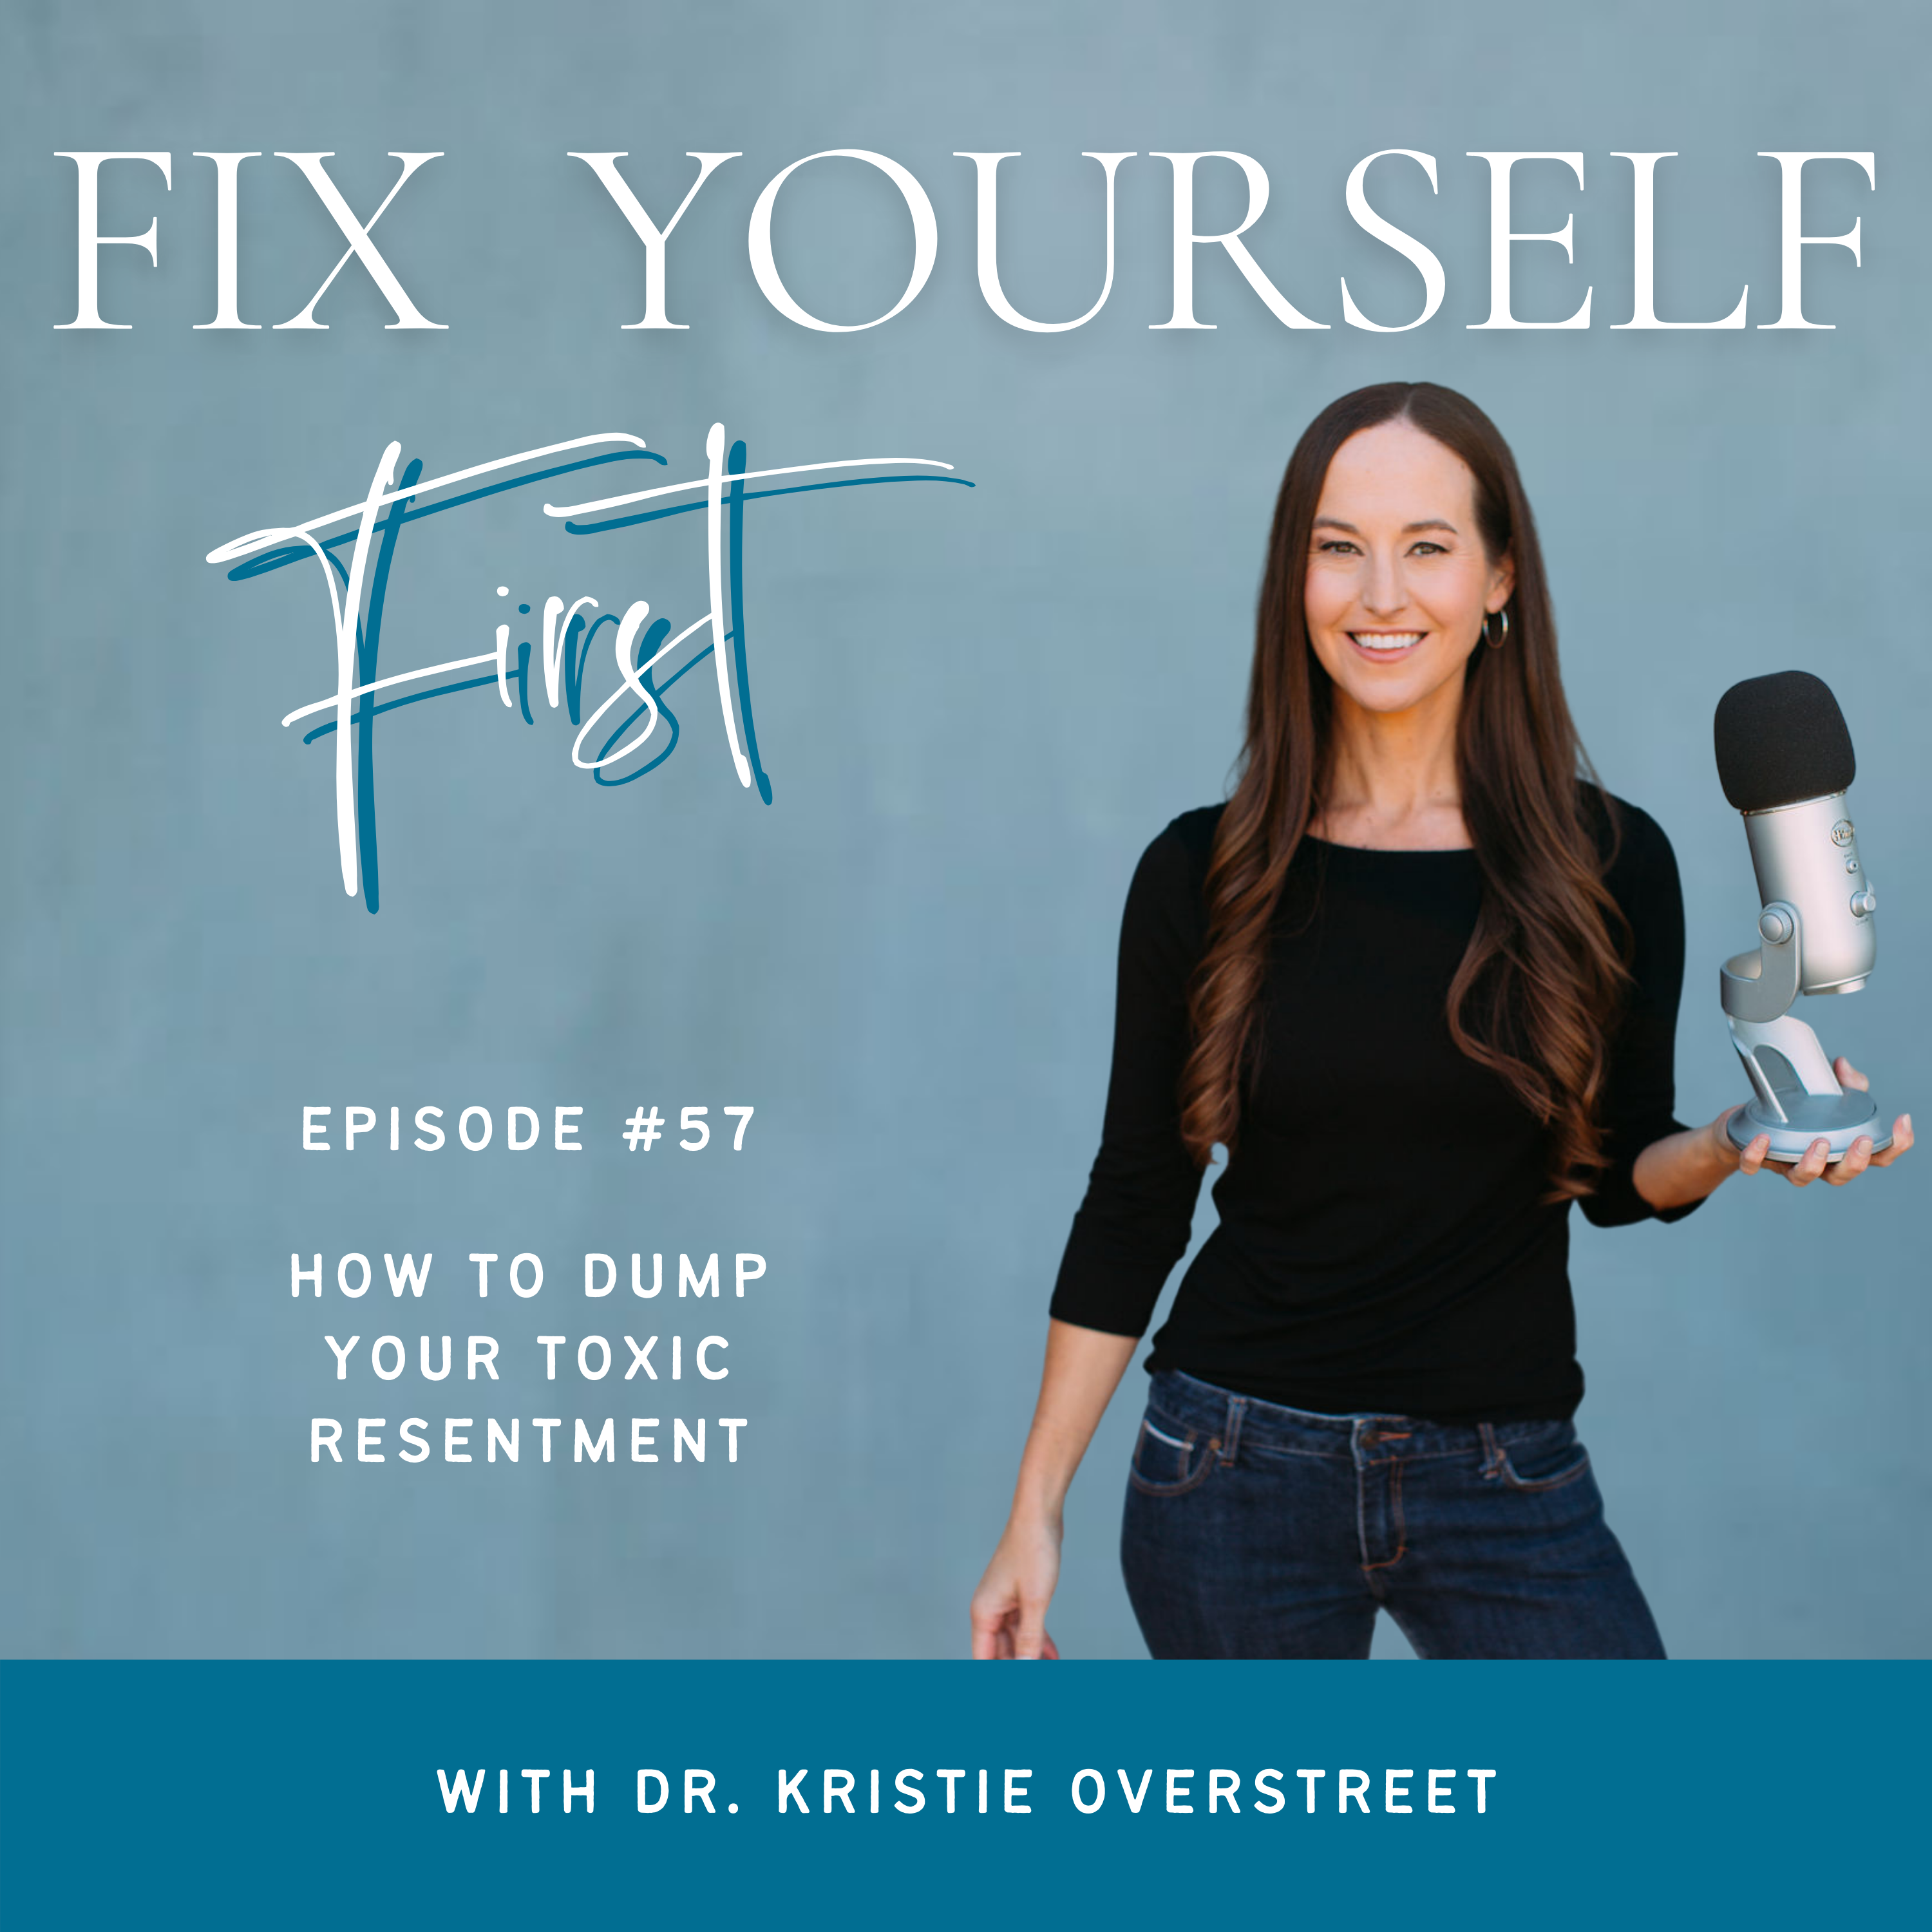 Fix Yourself First - Episode 57